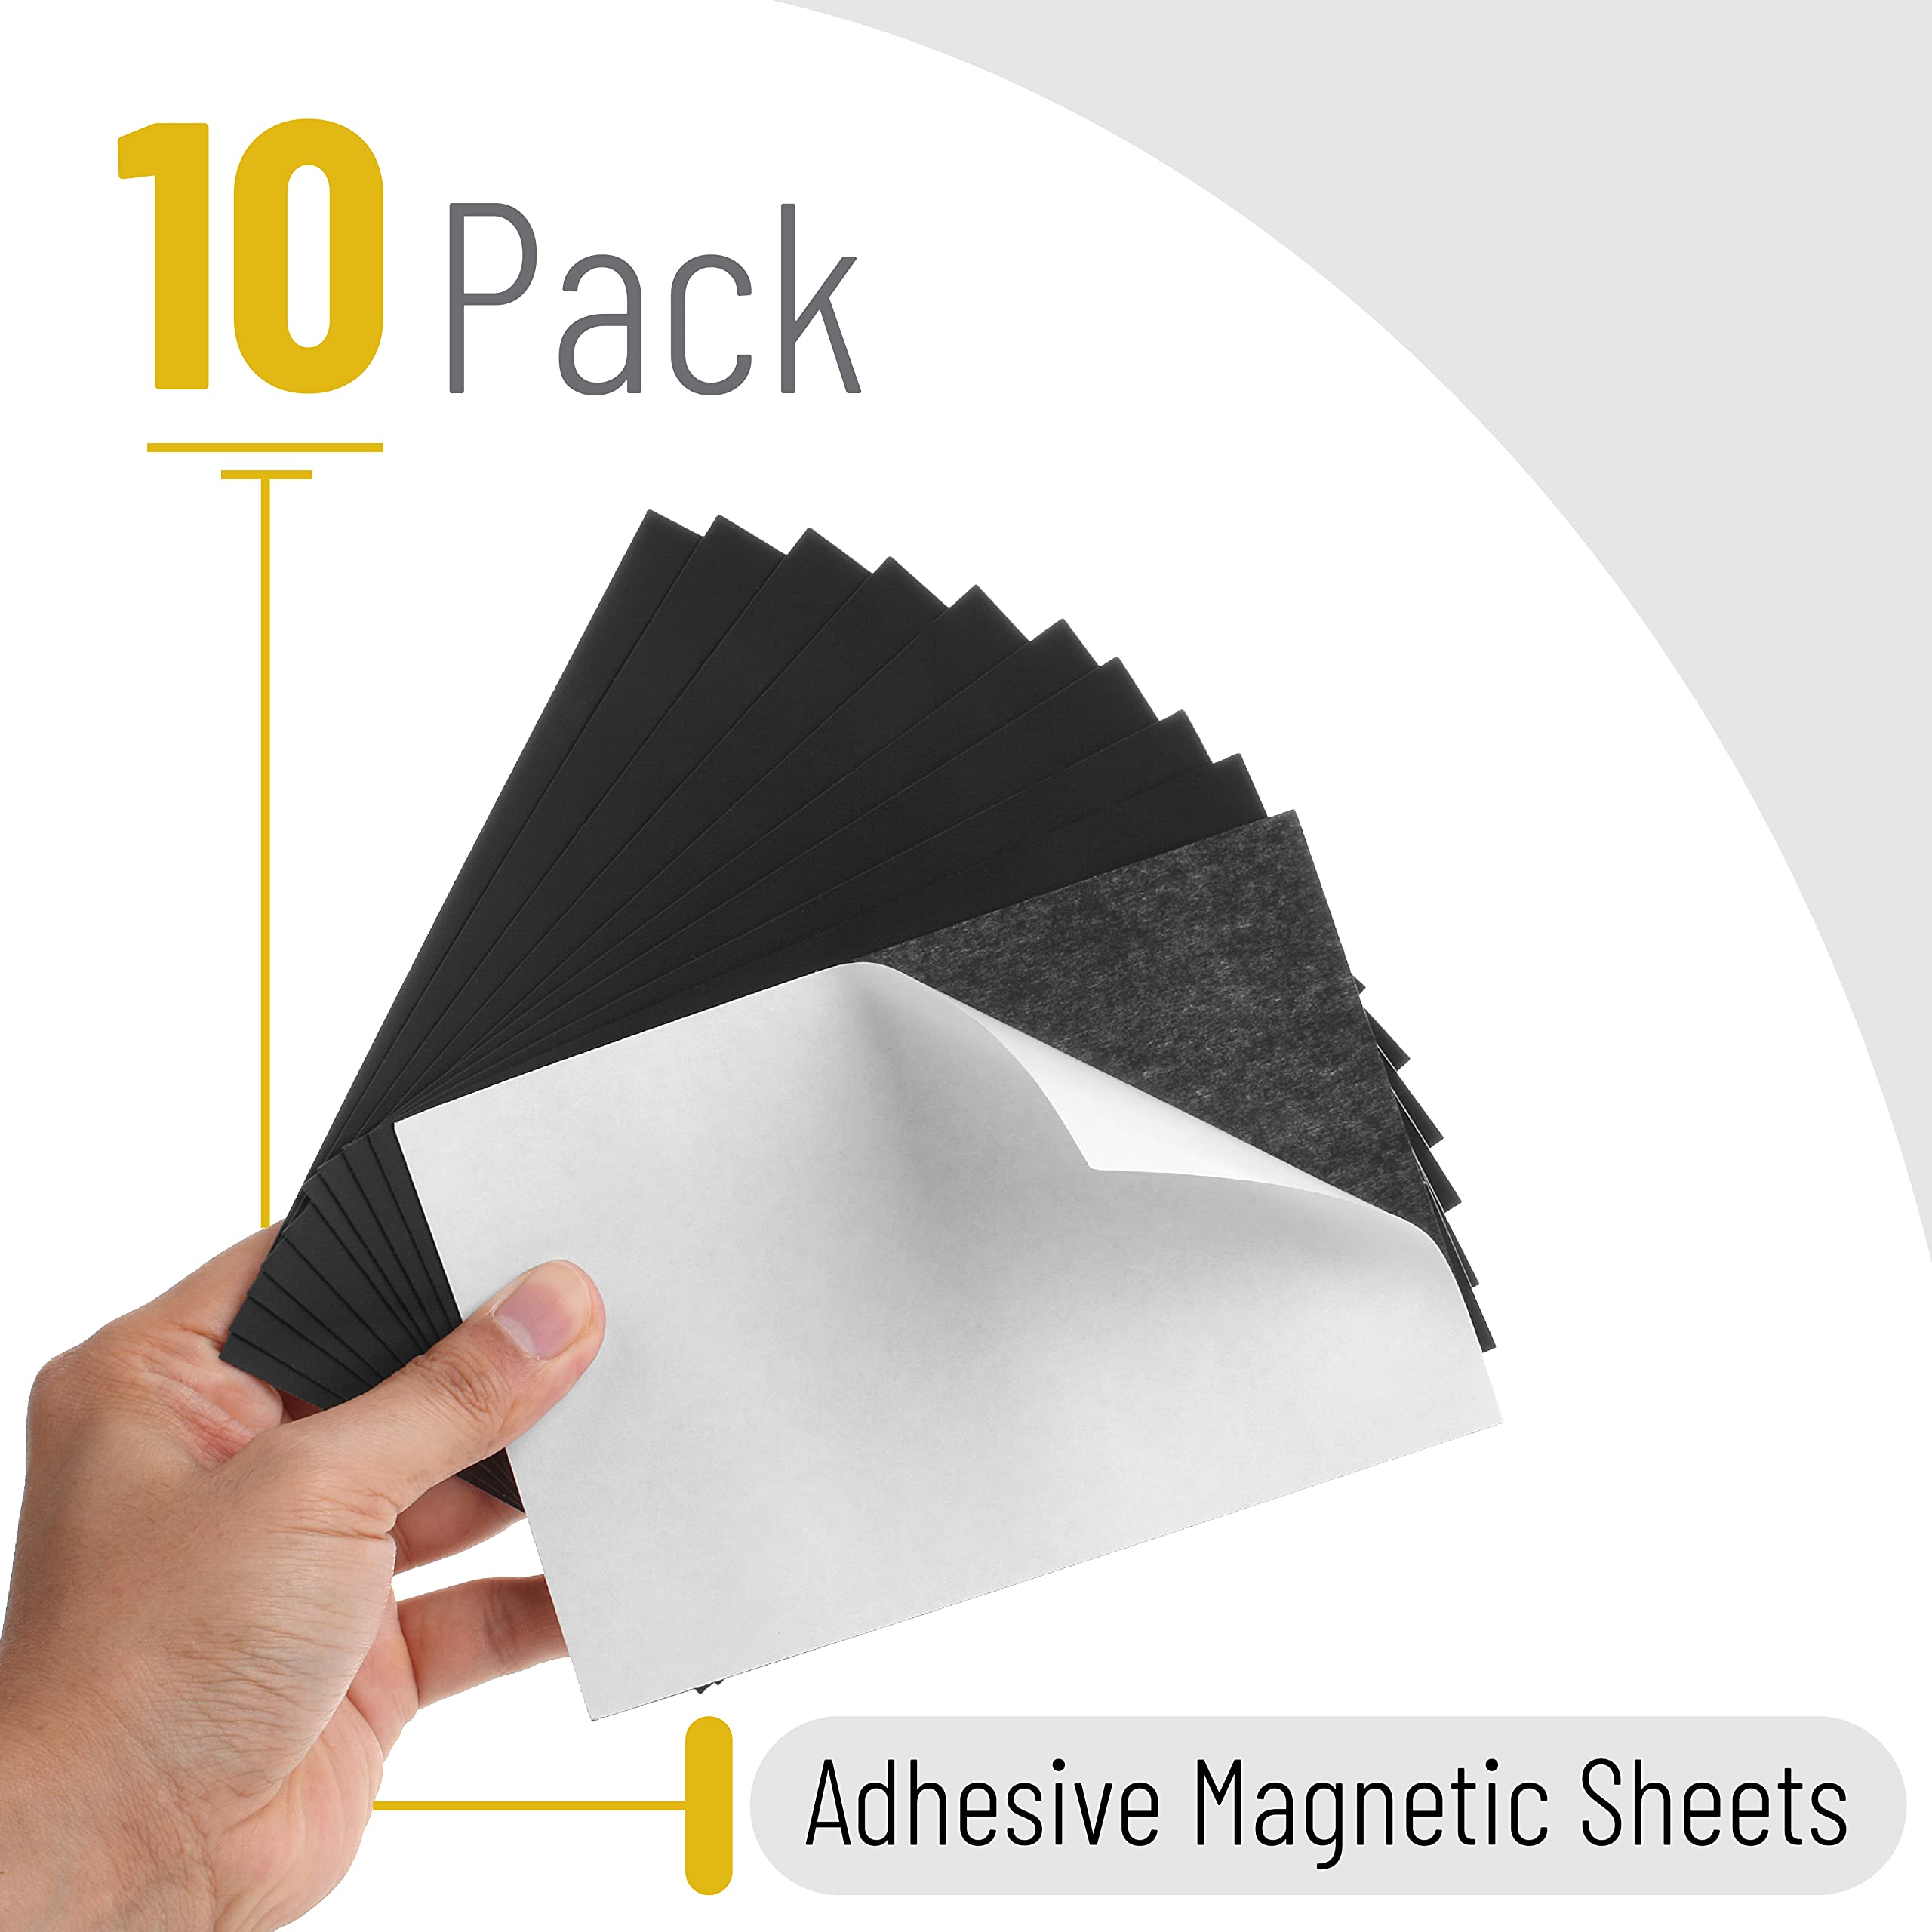  Grtard 10Pcs Magnetic Sheets with Adhesive Backing Cut Magnetic  Sheet and Customized Flexible Self Adhesive Magnet Paper Sheets for Craft  and DIY Magnetic Paper-4 x 6 : Office Products